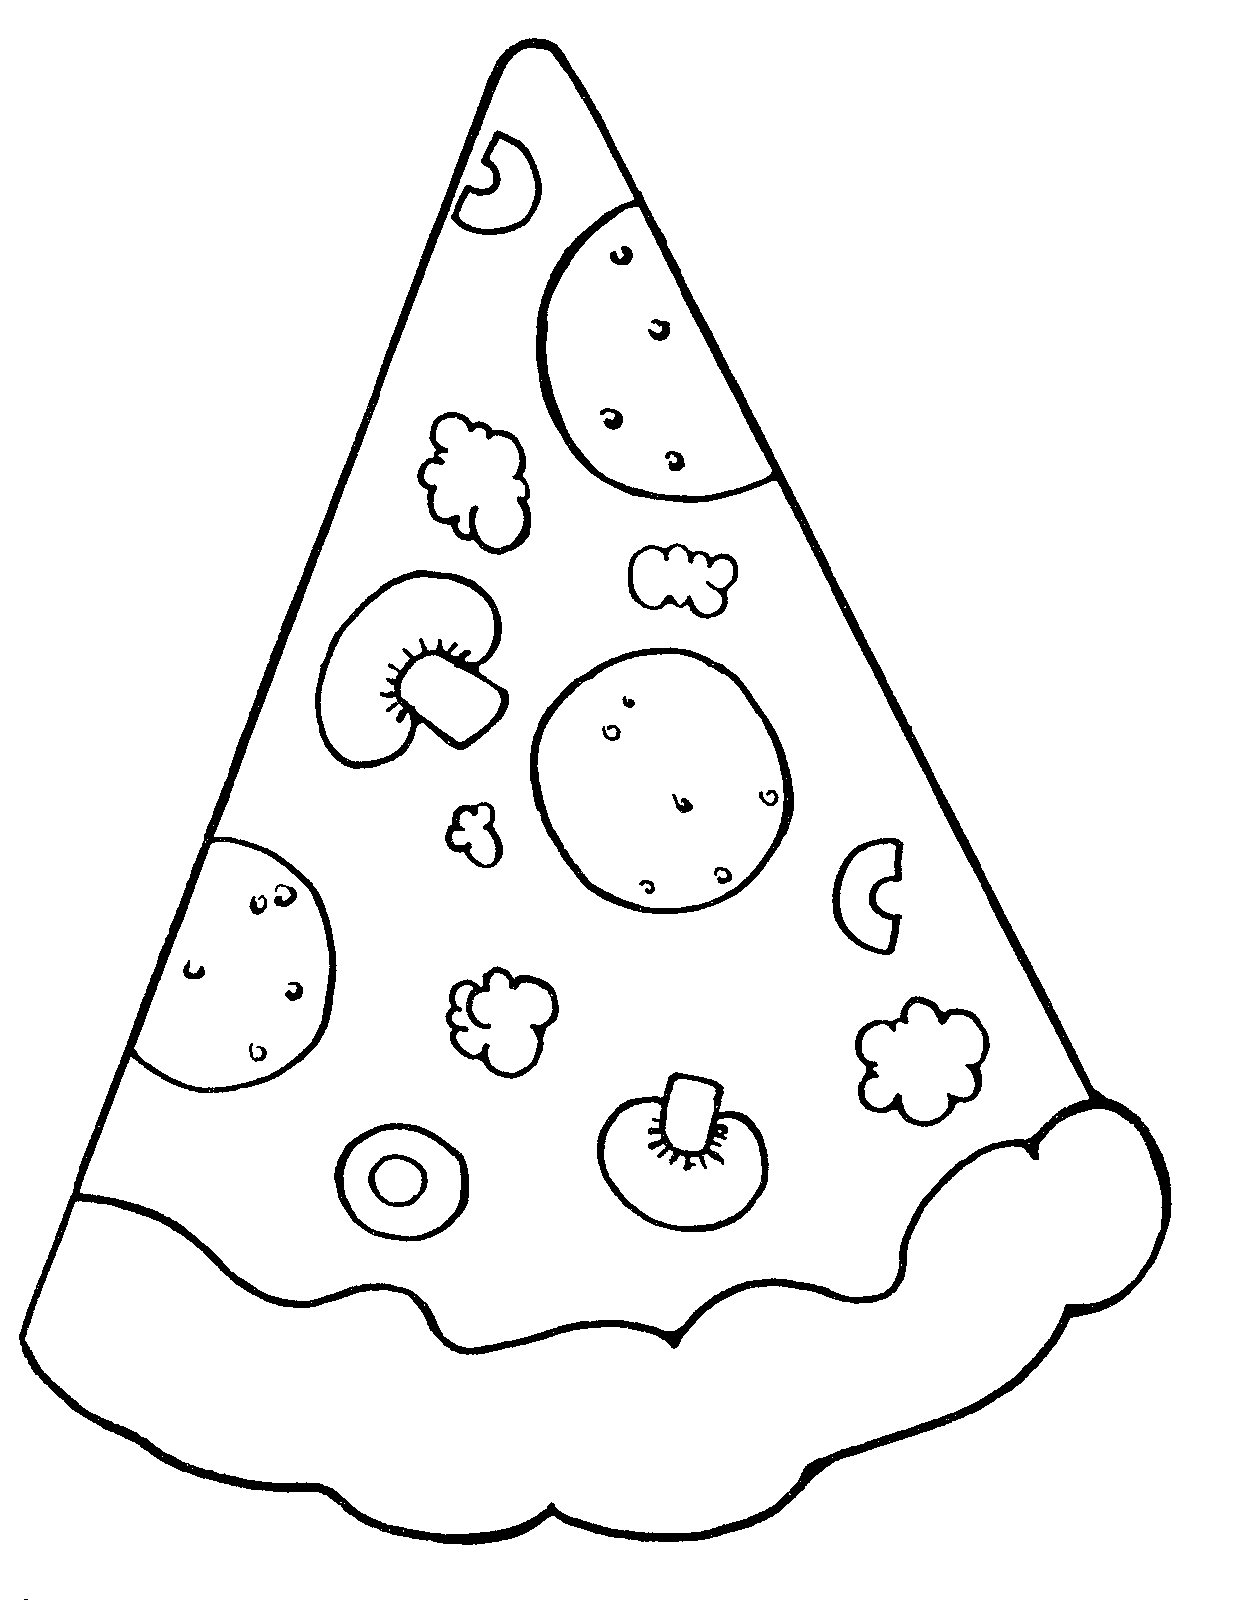 Pizza Coloring Pages Coloring Home